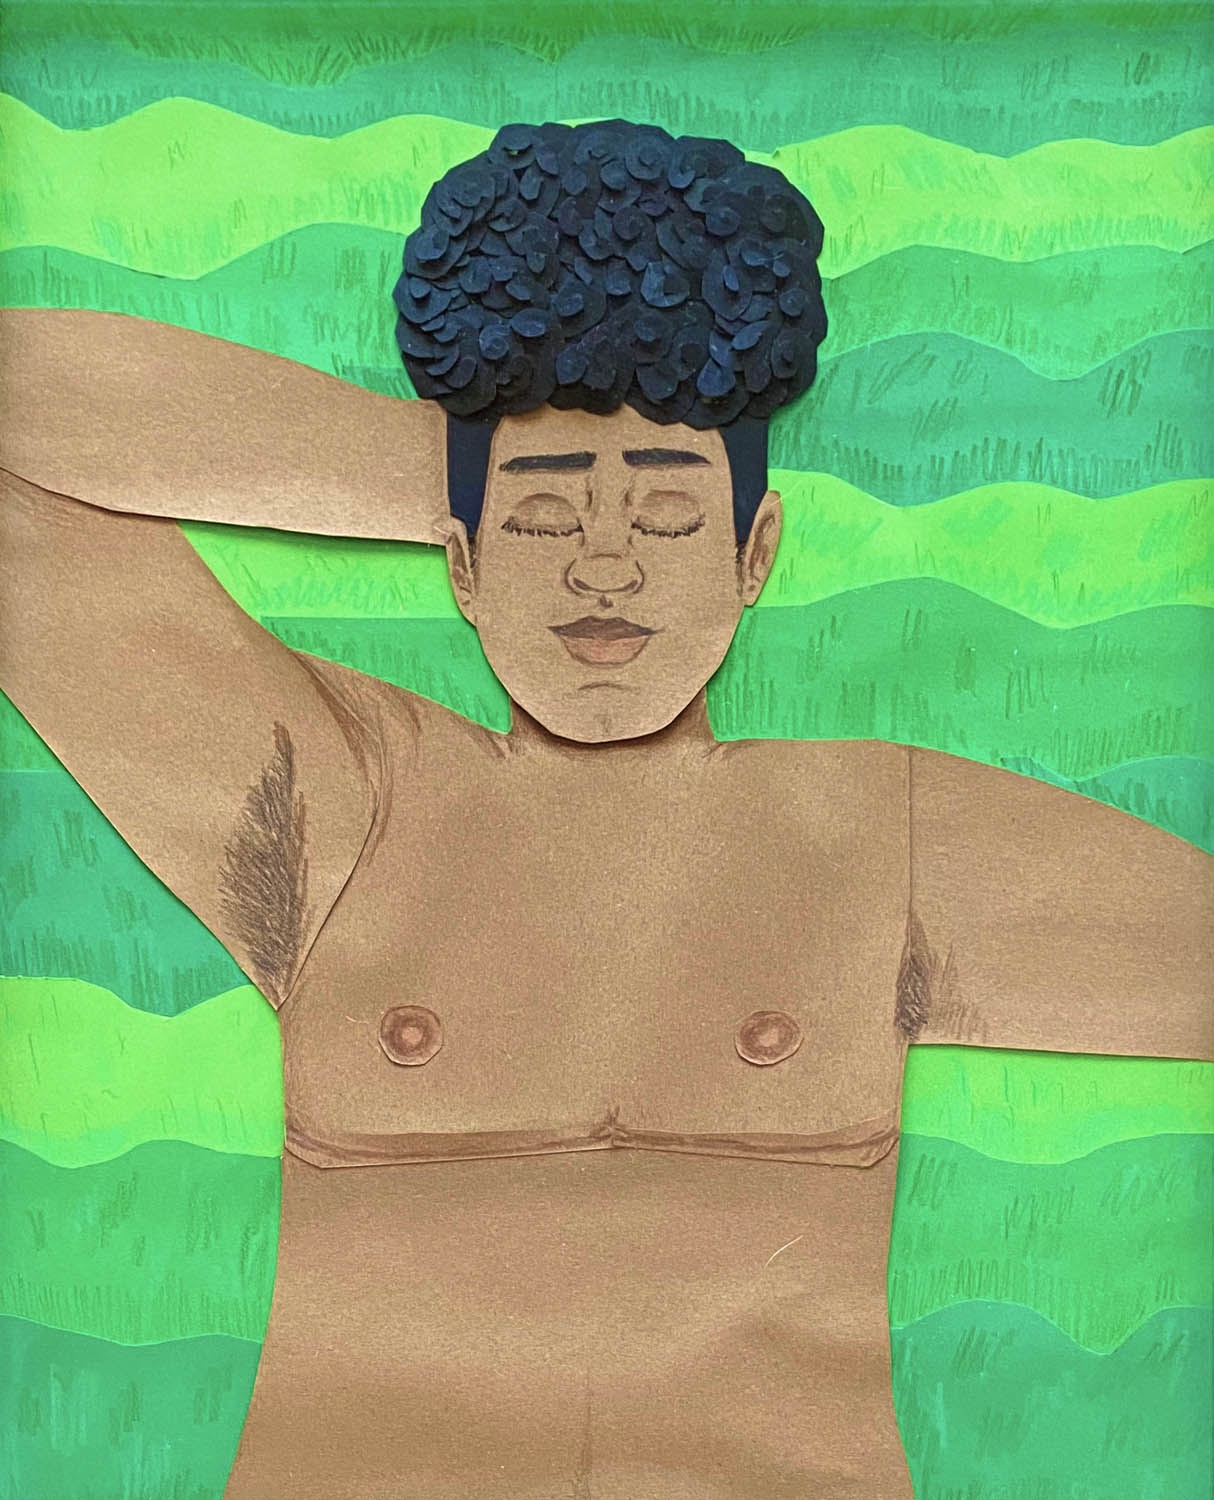 A paper collage and mixed media art piece of a shirtless black person with top surgery scars laying in the grass.